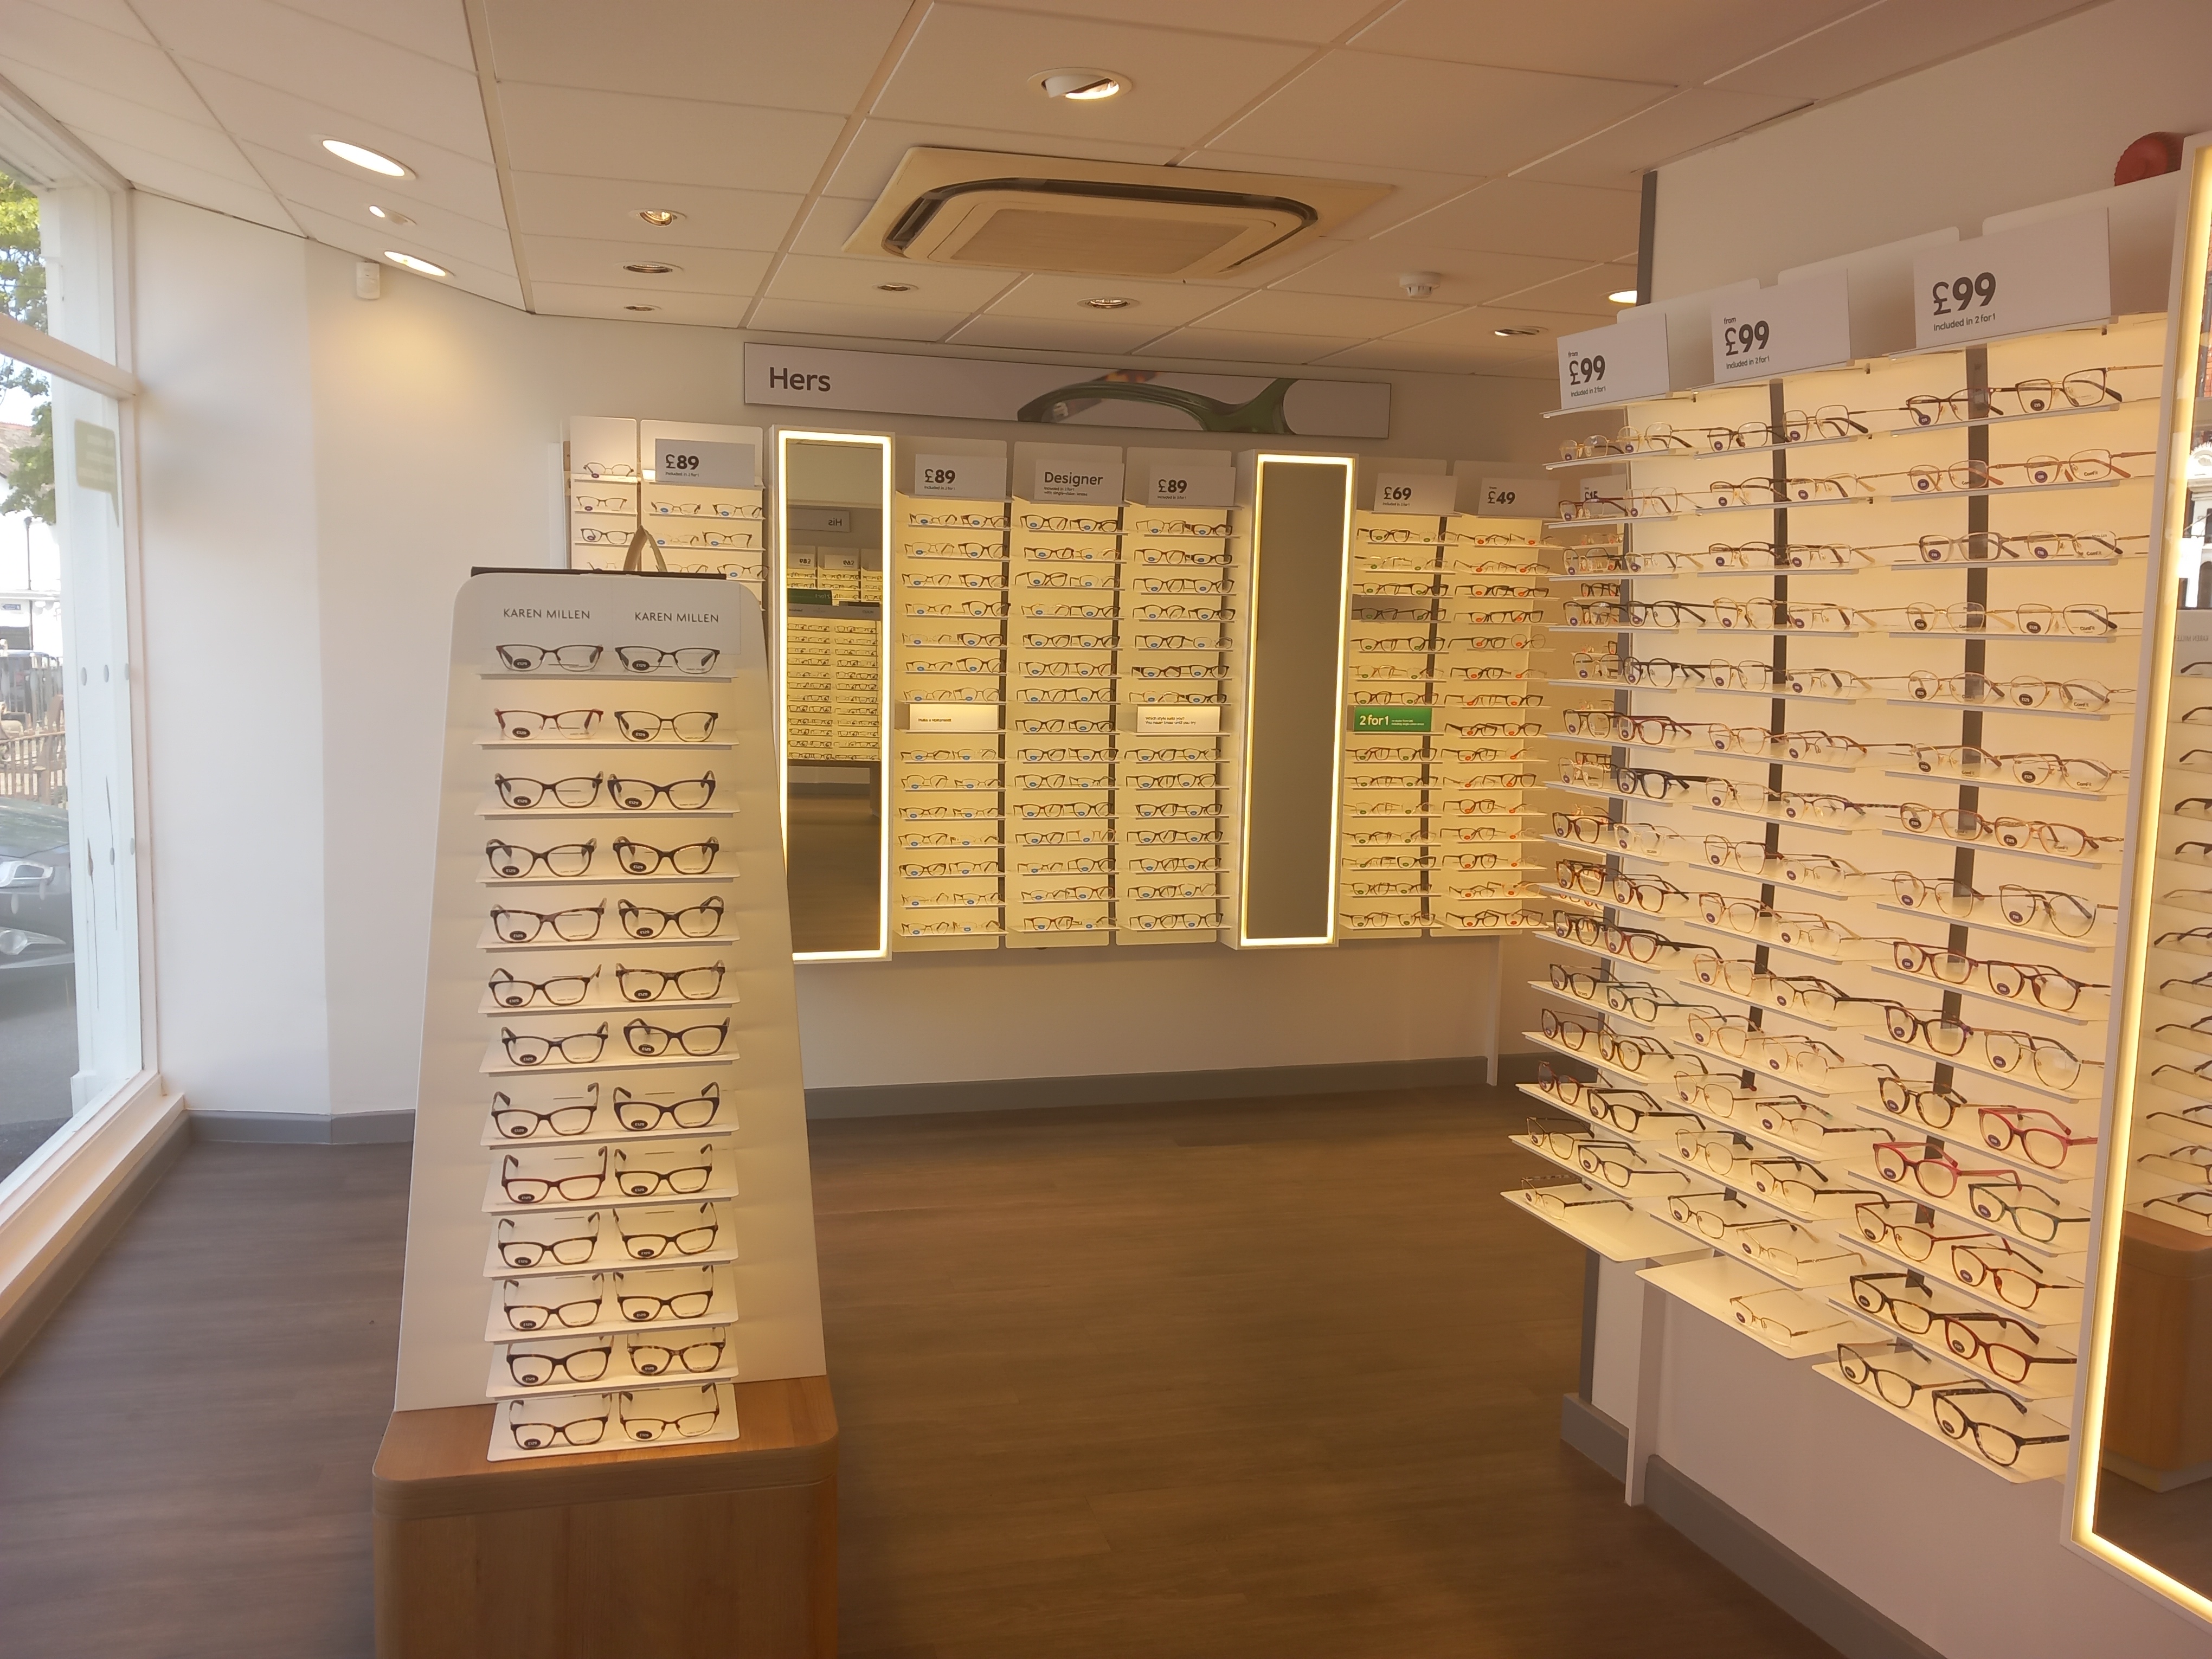 Specsavers Exmouth Specsavers Opticians and Audiologists - Exmouth Exmouth 01395 277107